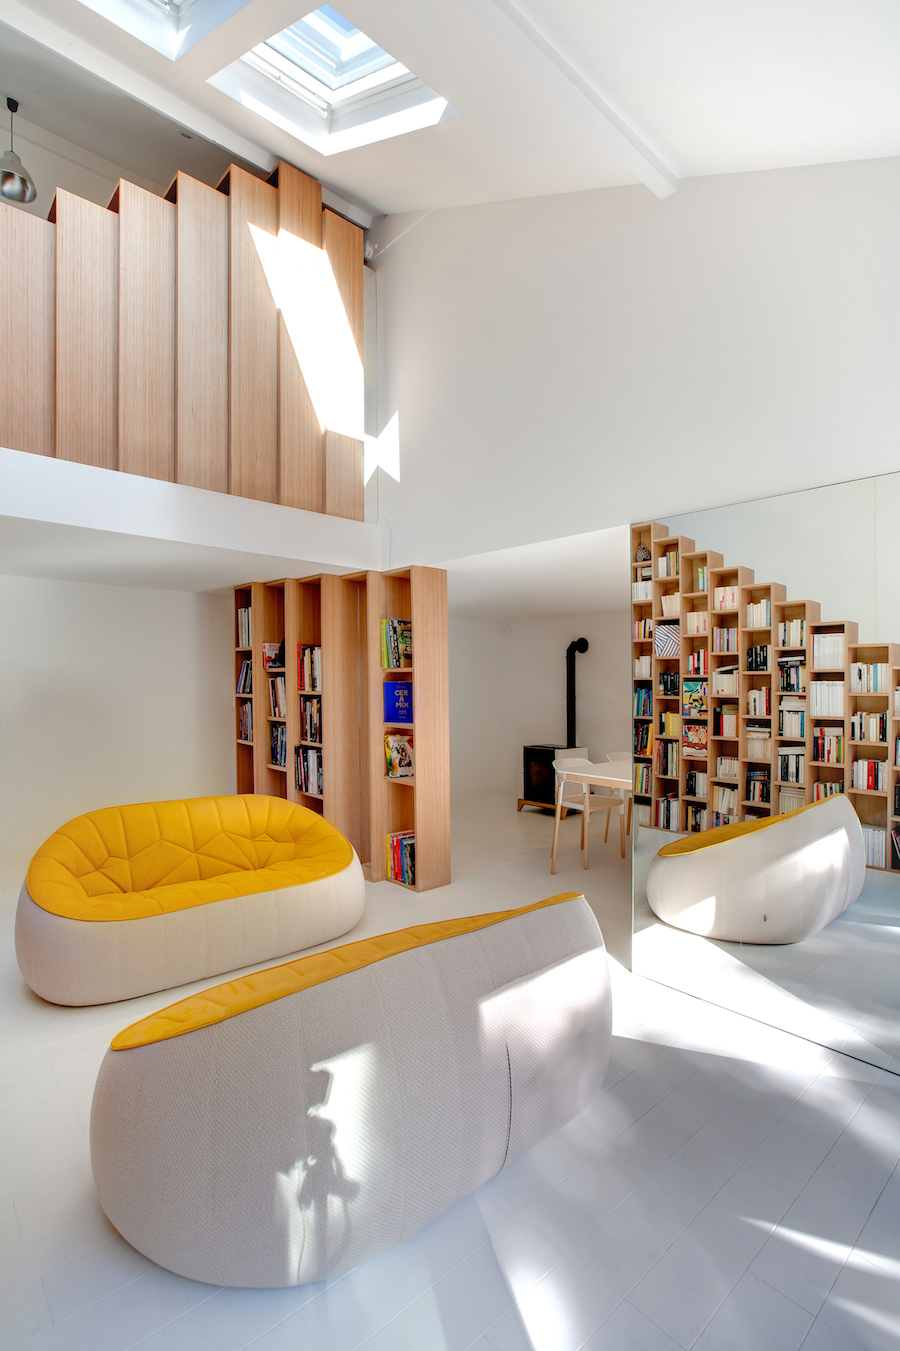 A Stunning, Bright Home in Paris by Andrea Mosca